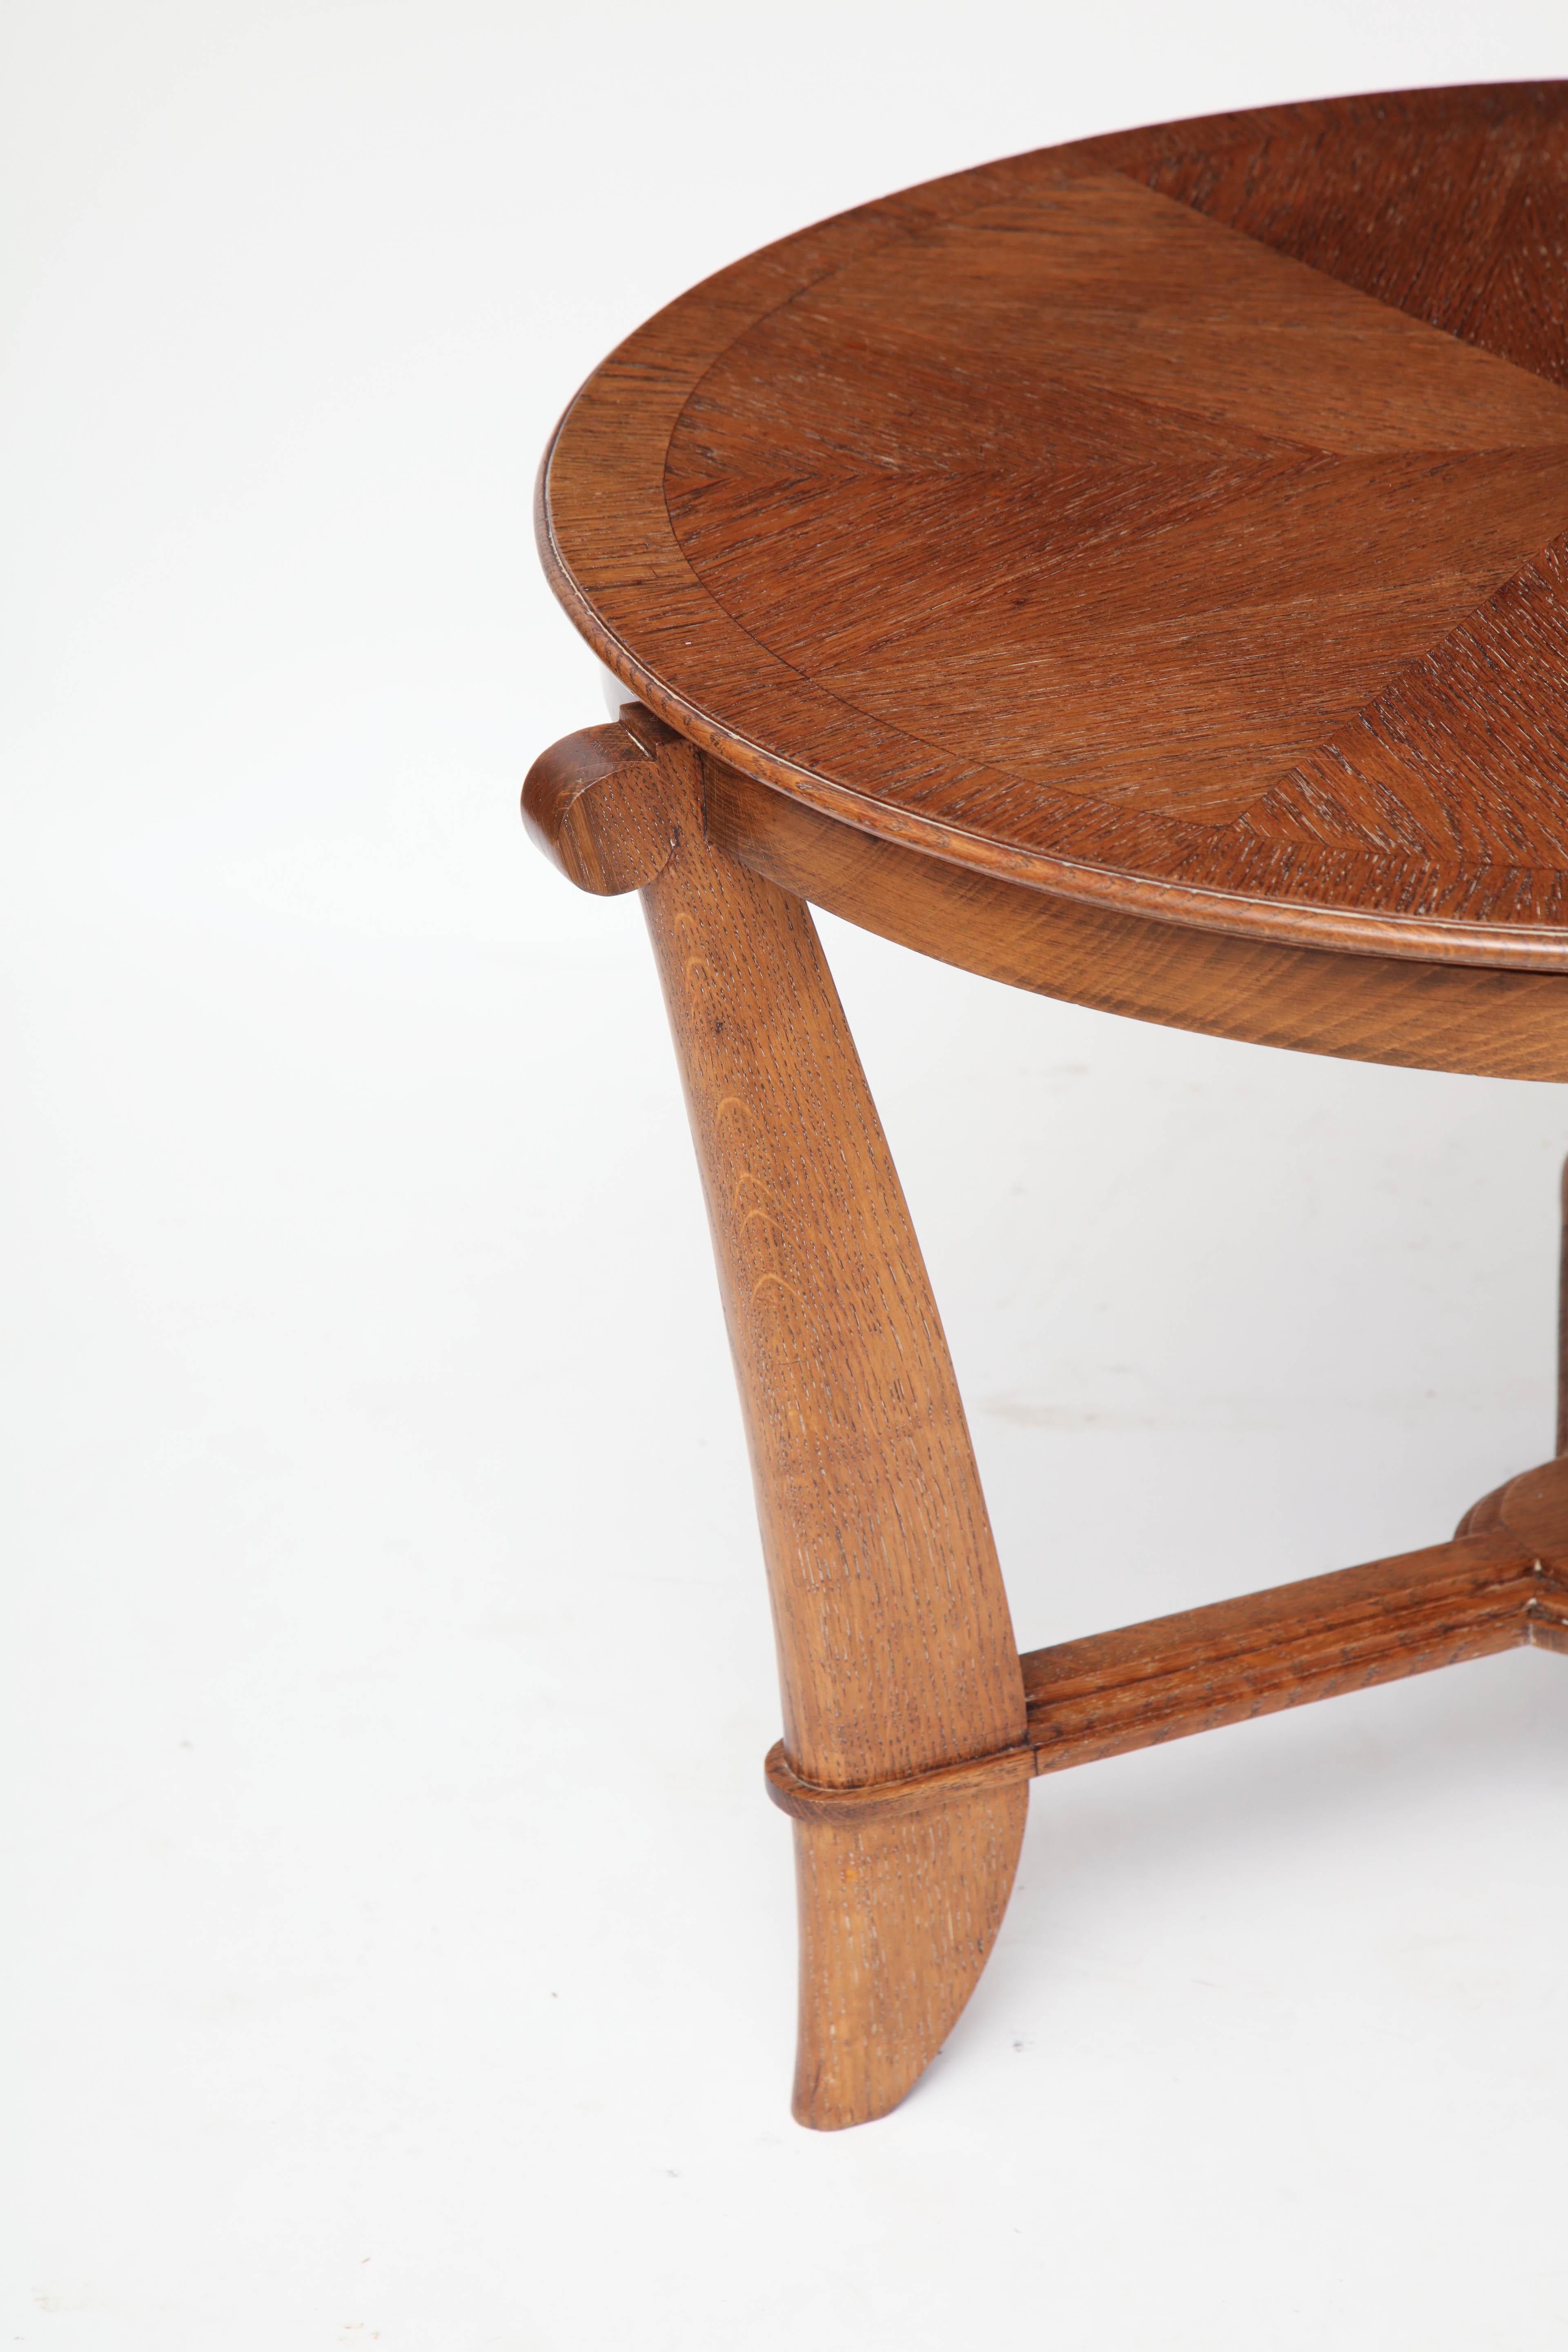 Mid-20th Century French Art Deco Circular Oak Side Table with Shaped Legs For Sale